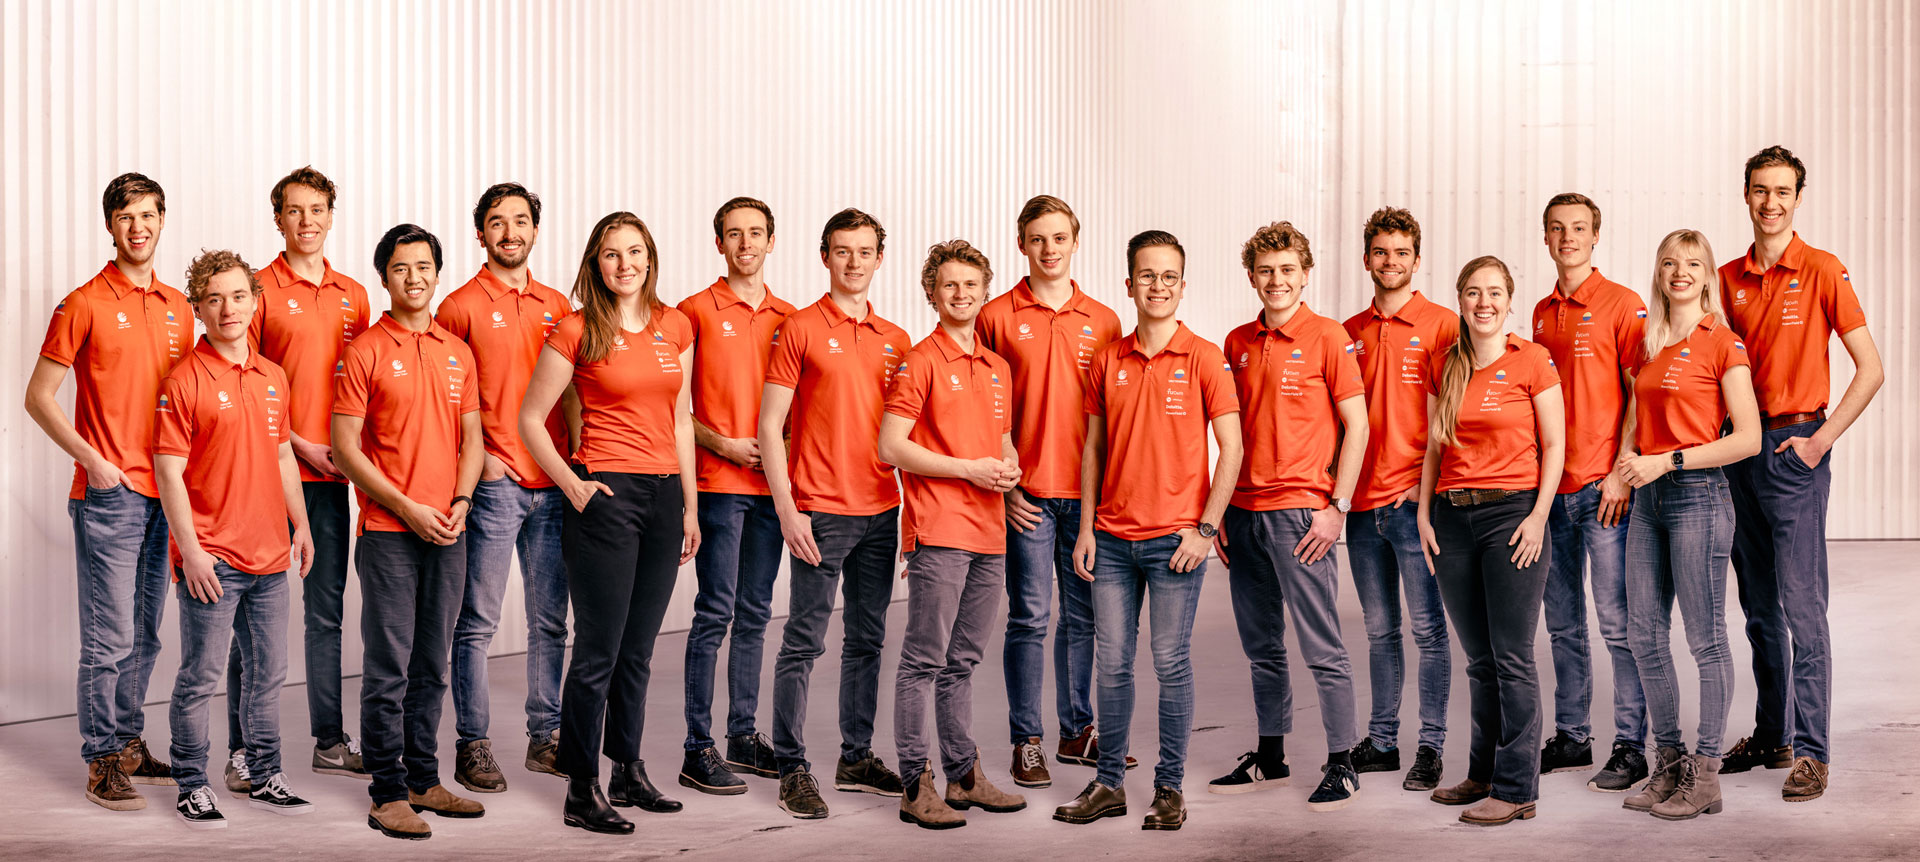  Vattenfall Solar Team 2020. Due to Coronavirus guidance, the Vattenfall Solar Team could not be photographed together. The team photo is made up of 17 individual photos.